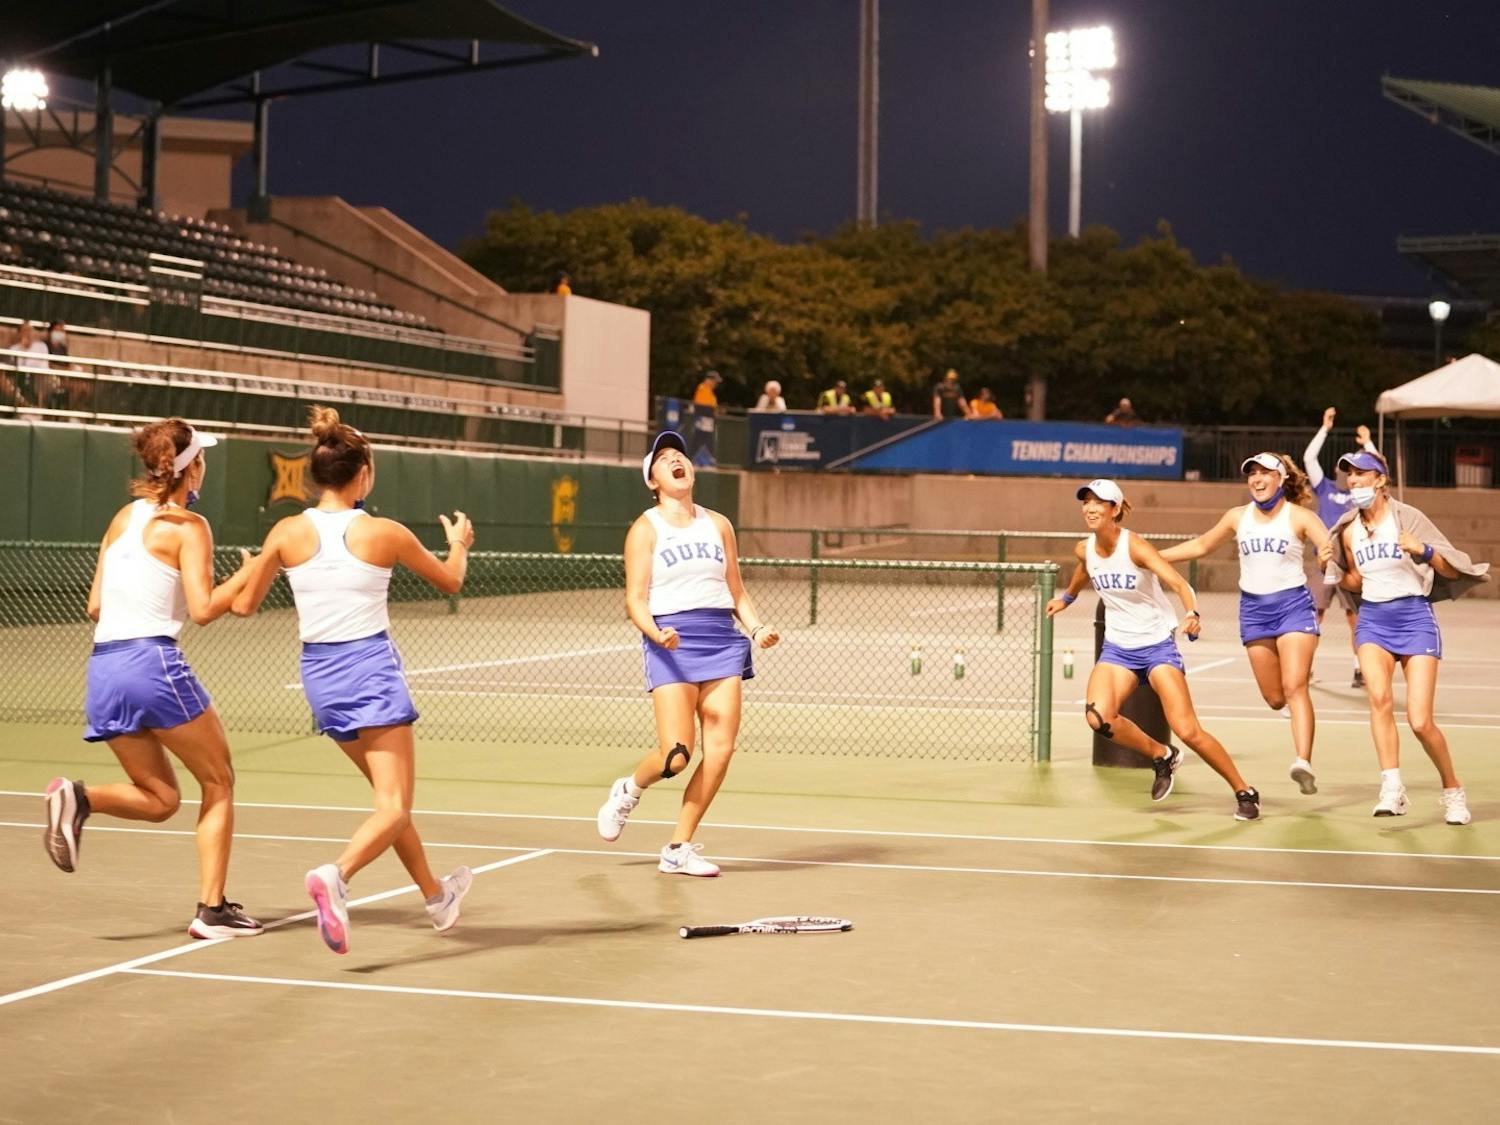 Once Chen secured the 4-3 Duke win, it became a Blue Devil frenzy on Court No. 1.